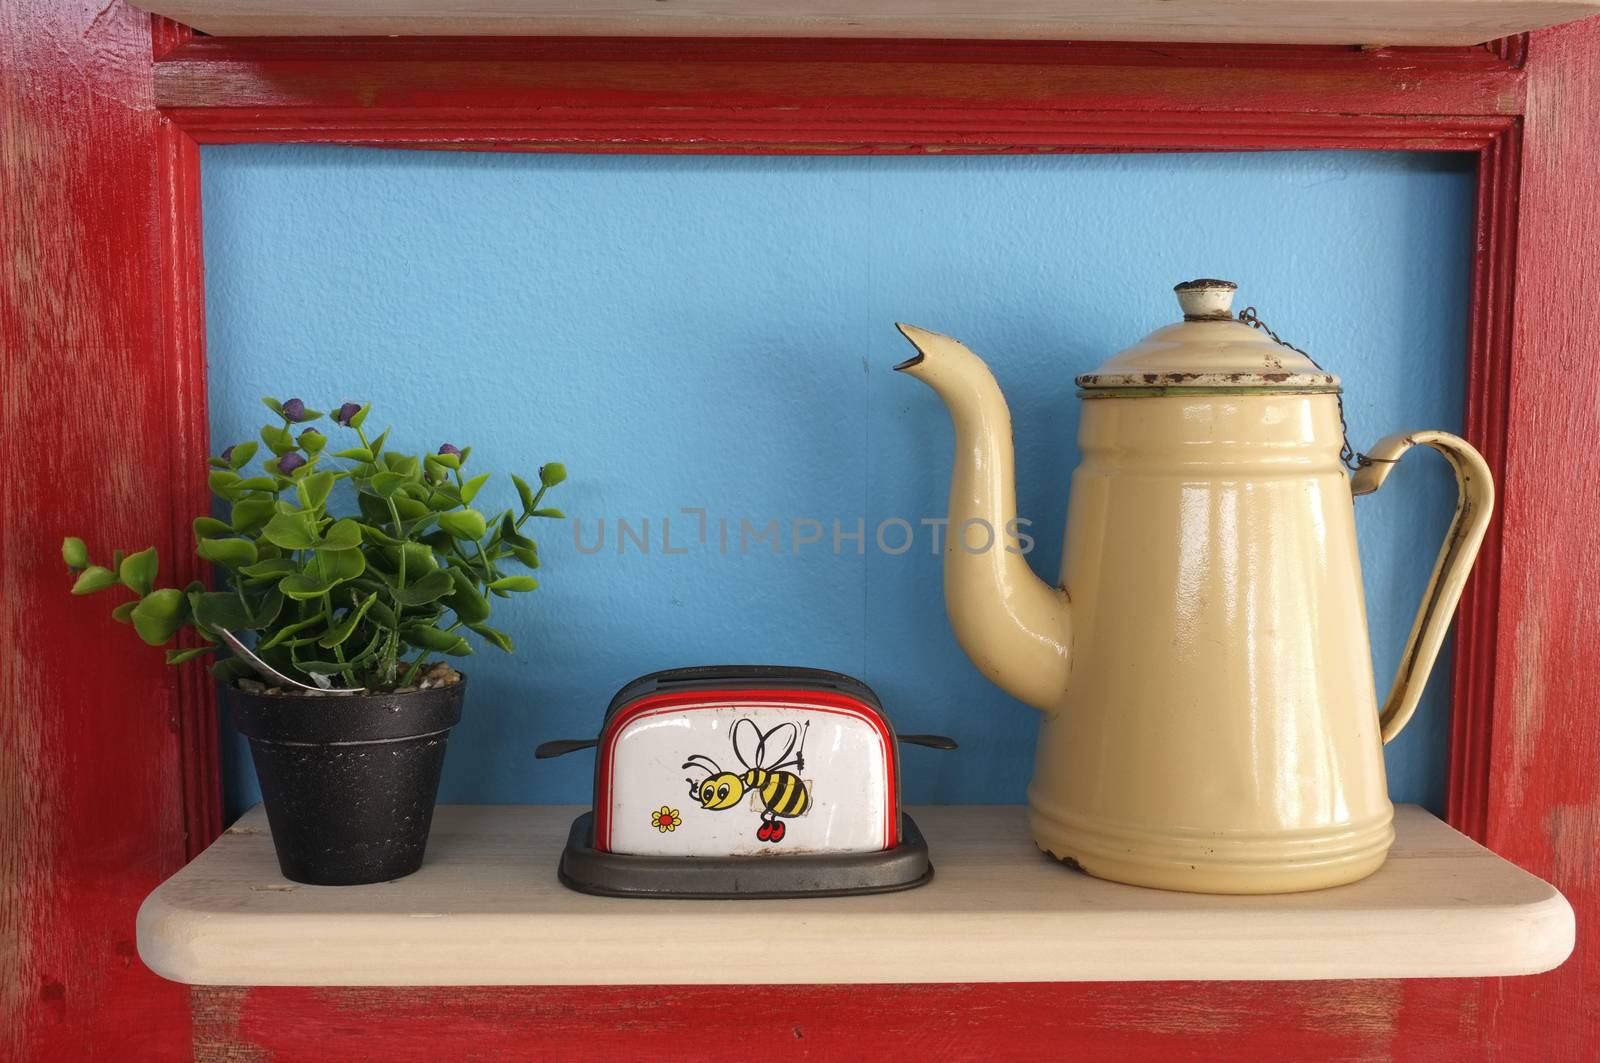 Retro kitchenware and plant pot on wooden shelf, blue background with red frame